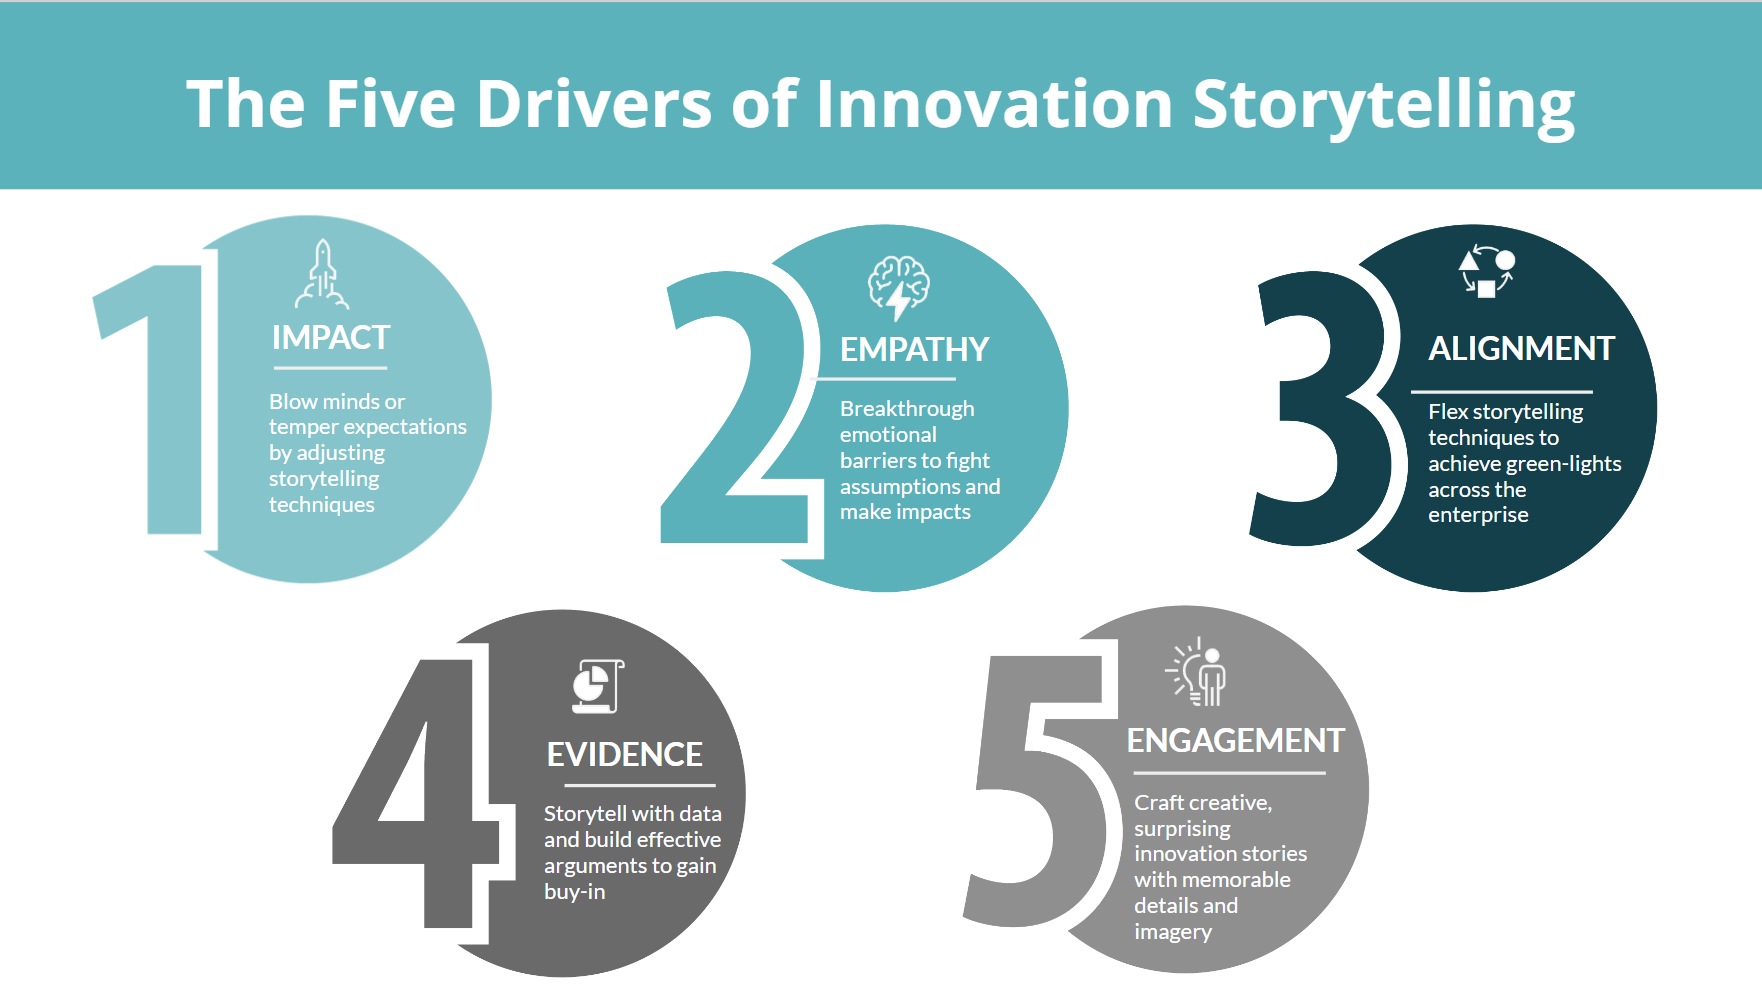 The Five Drivers of Innovation Storytelling